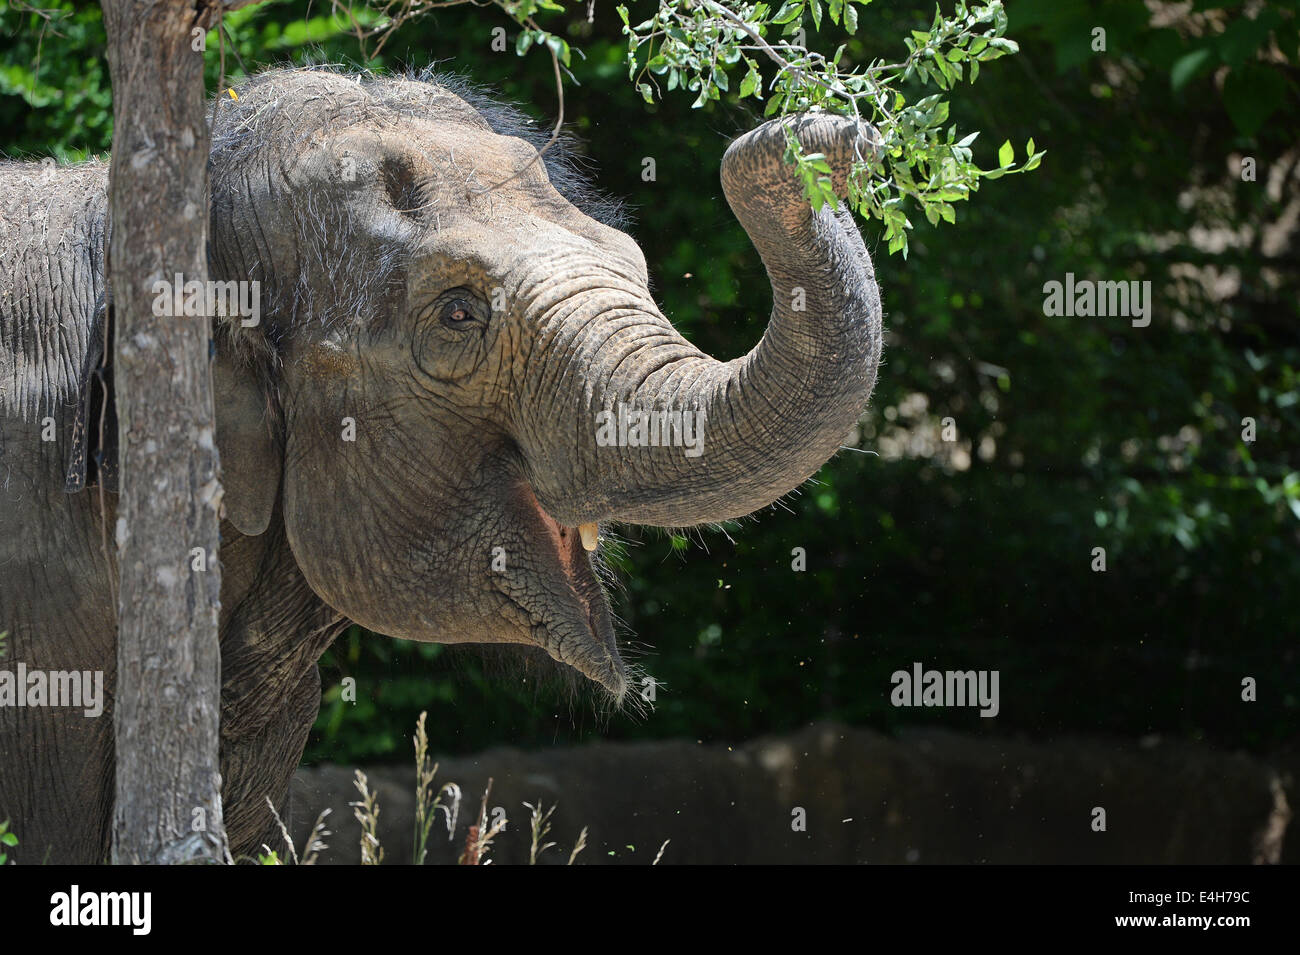 Young Asian elephant grabbing branch during sunny day Stock Photo